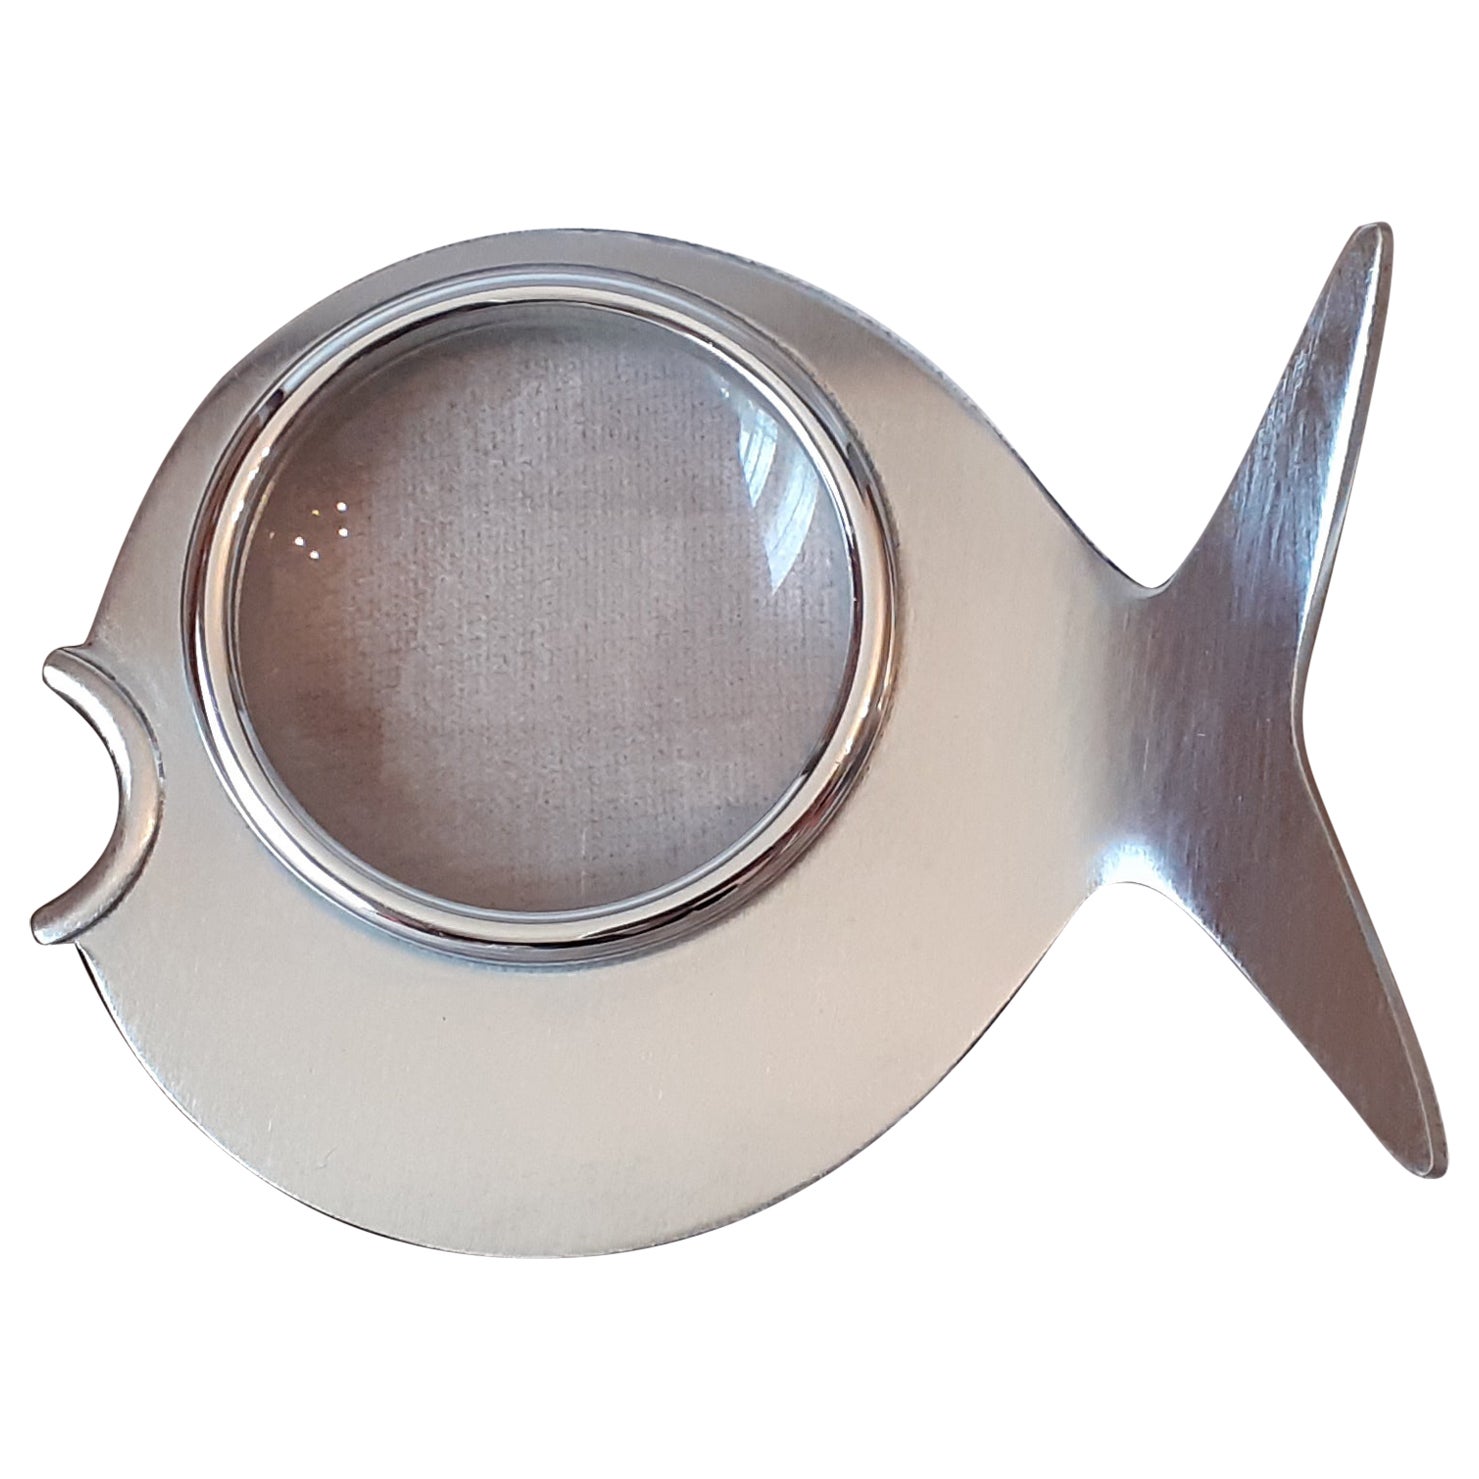 Exceptional Hermès Magnifying Glass Fish Shaped Rare For Sale